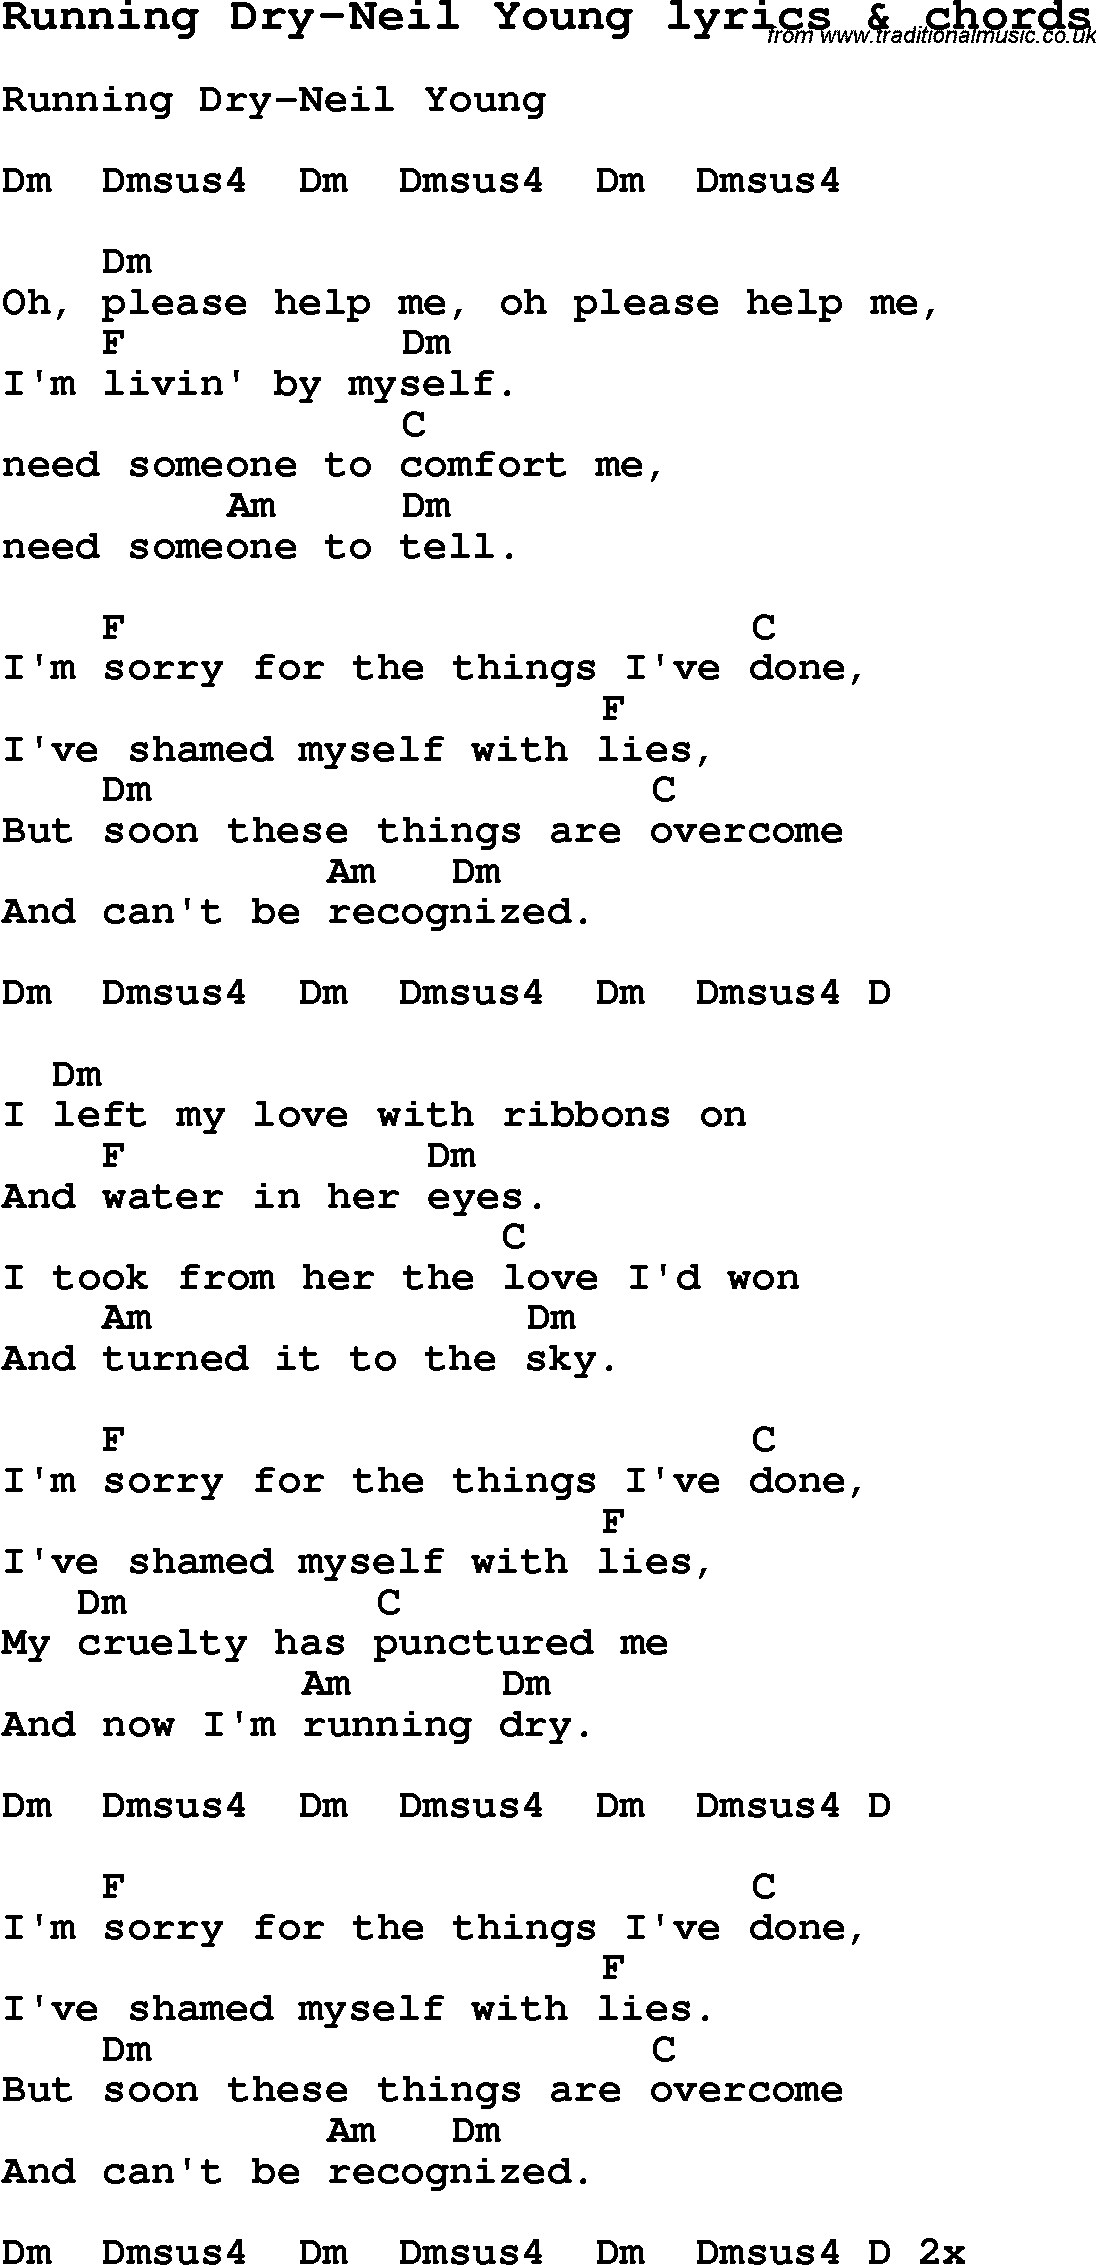 Love Song Lyrics for: Running Dry-Neil Young with chords for Ukulele, Guitar Banjo etc.